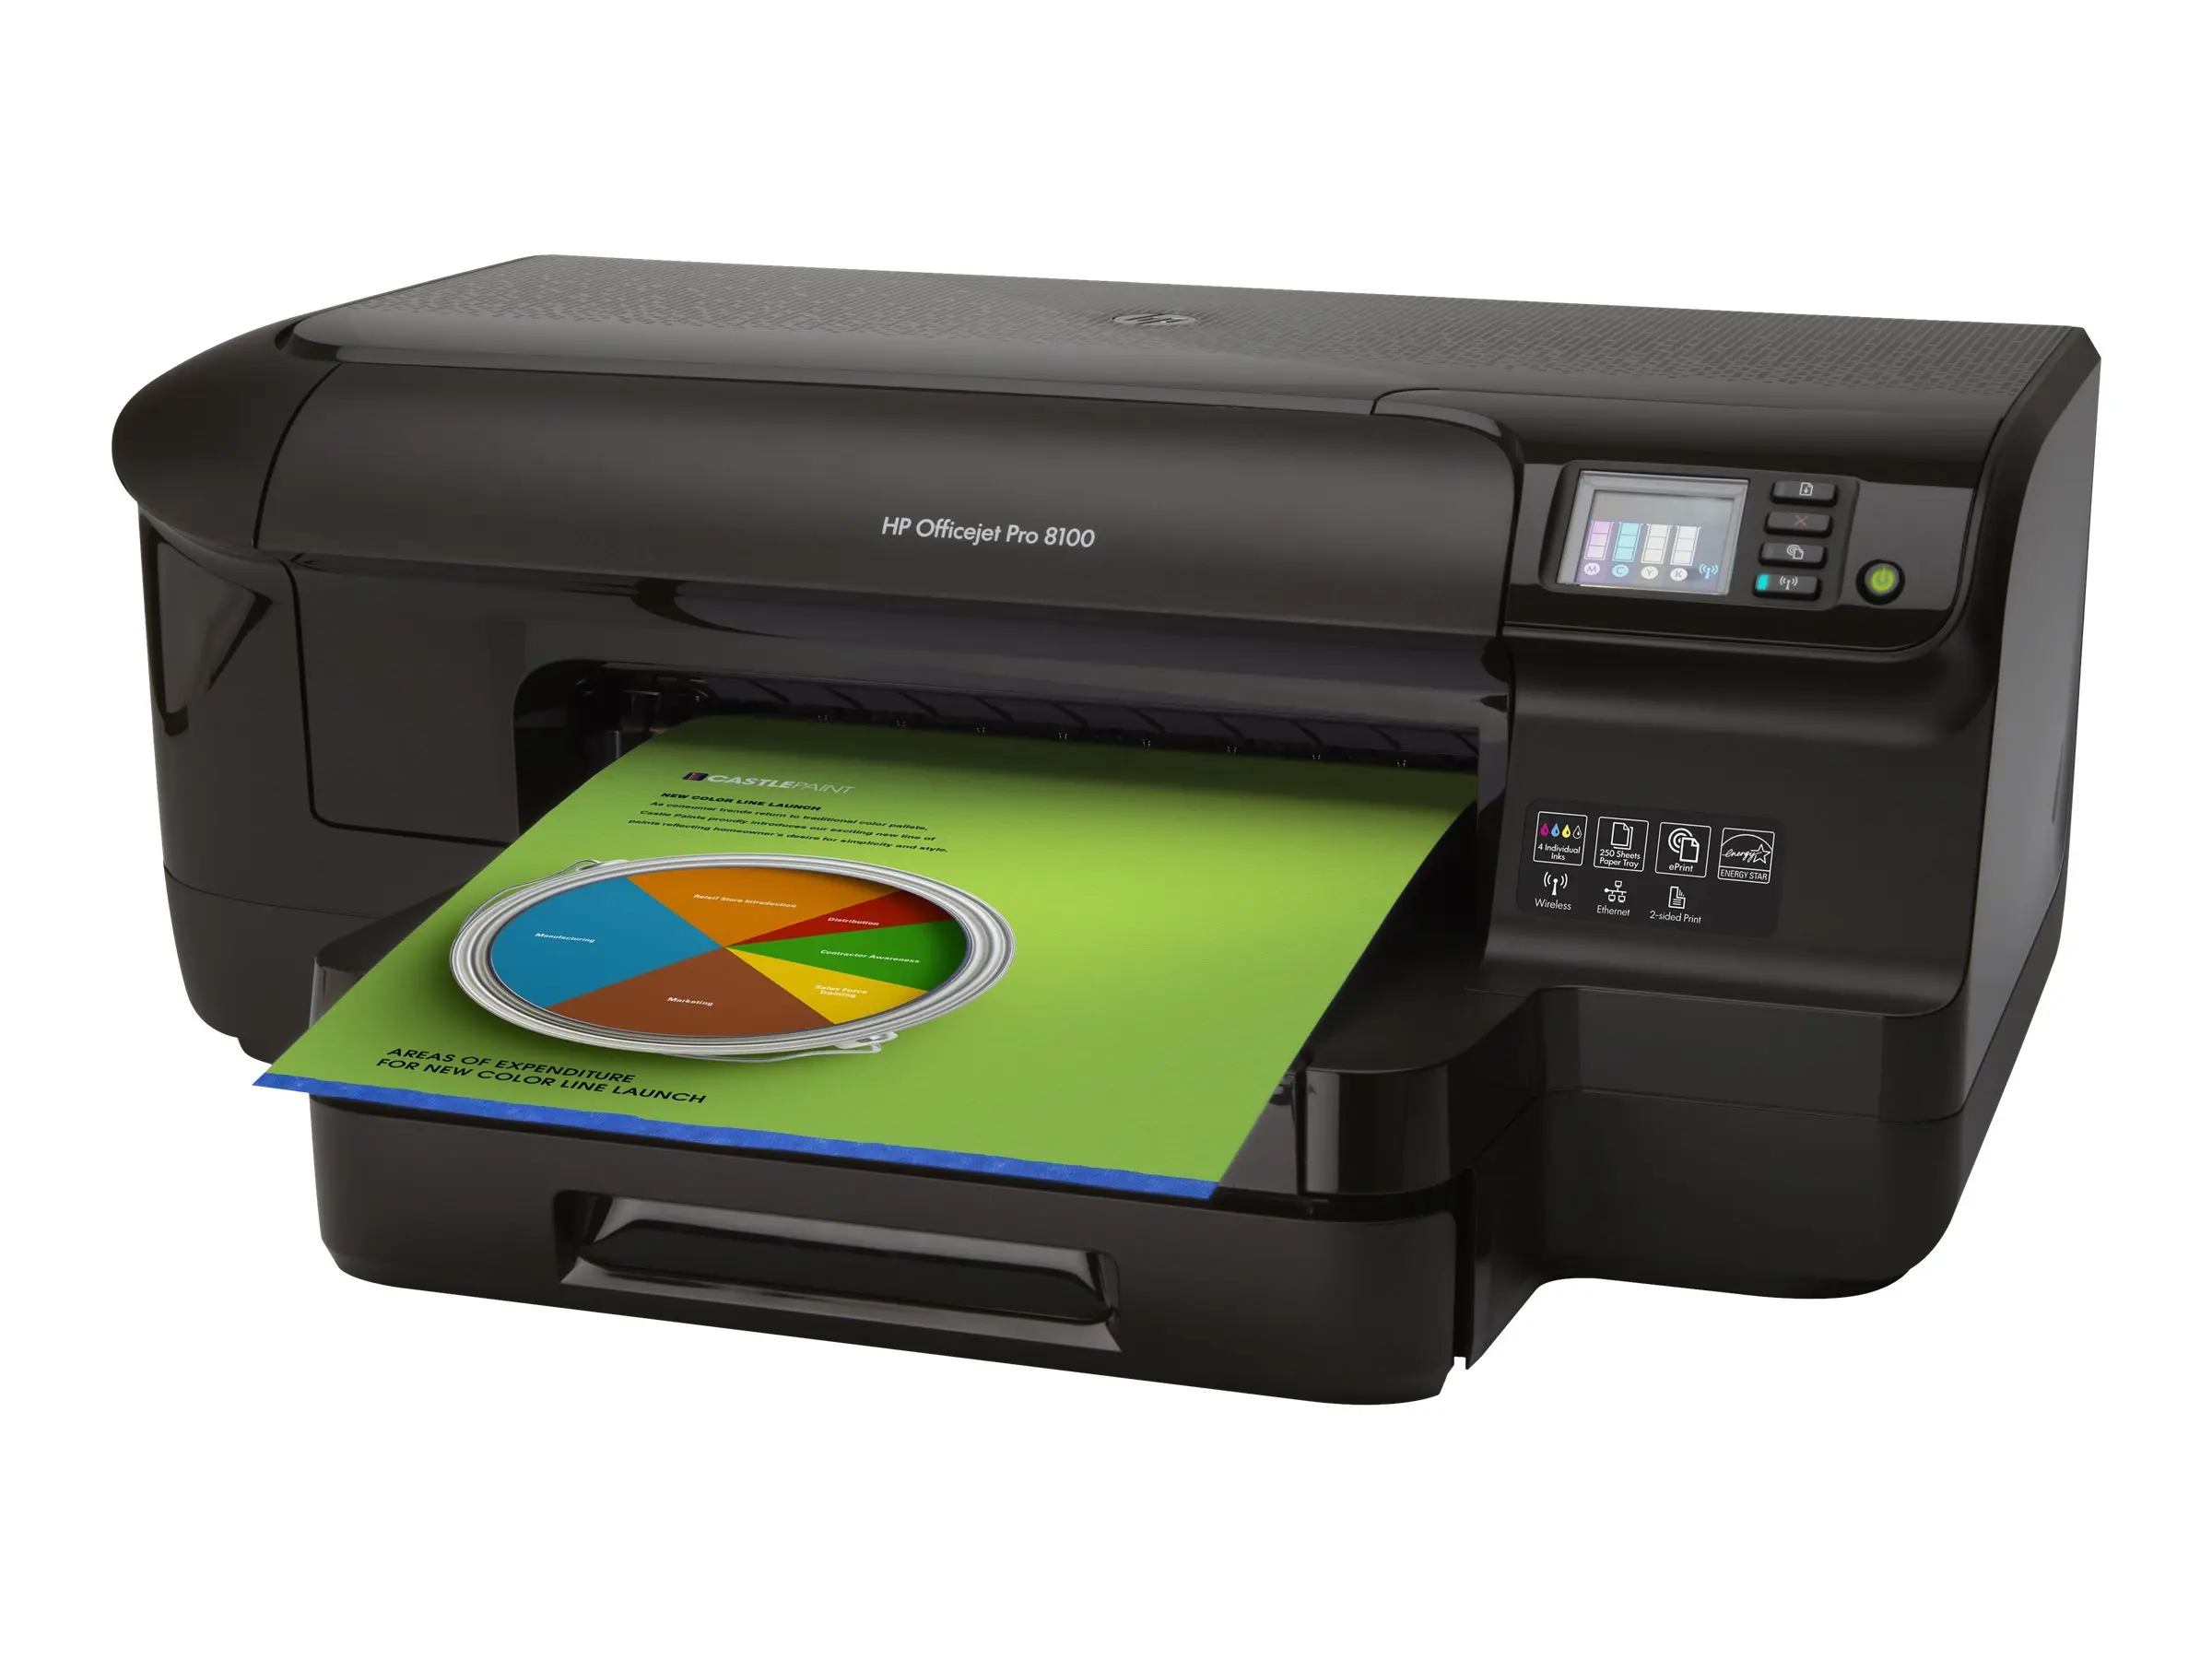 hewlett packard officejet pro 8100 driver - What is the product number for HP Officejet Pro 8100